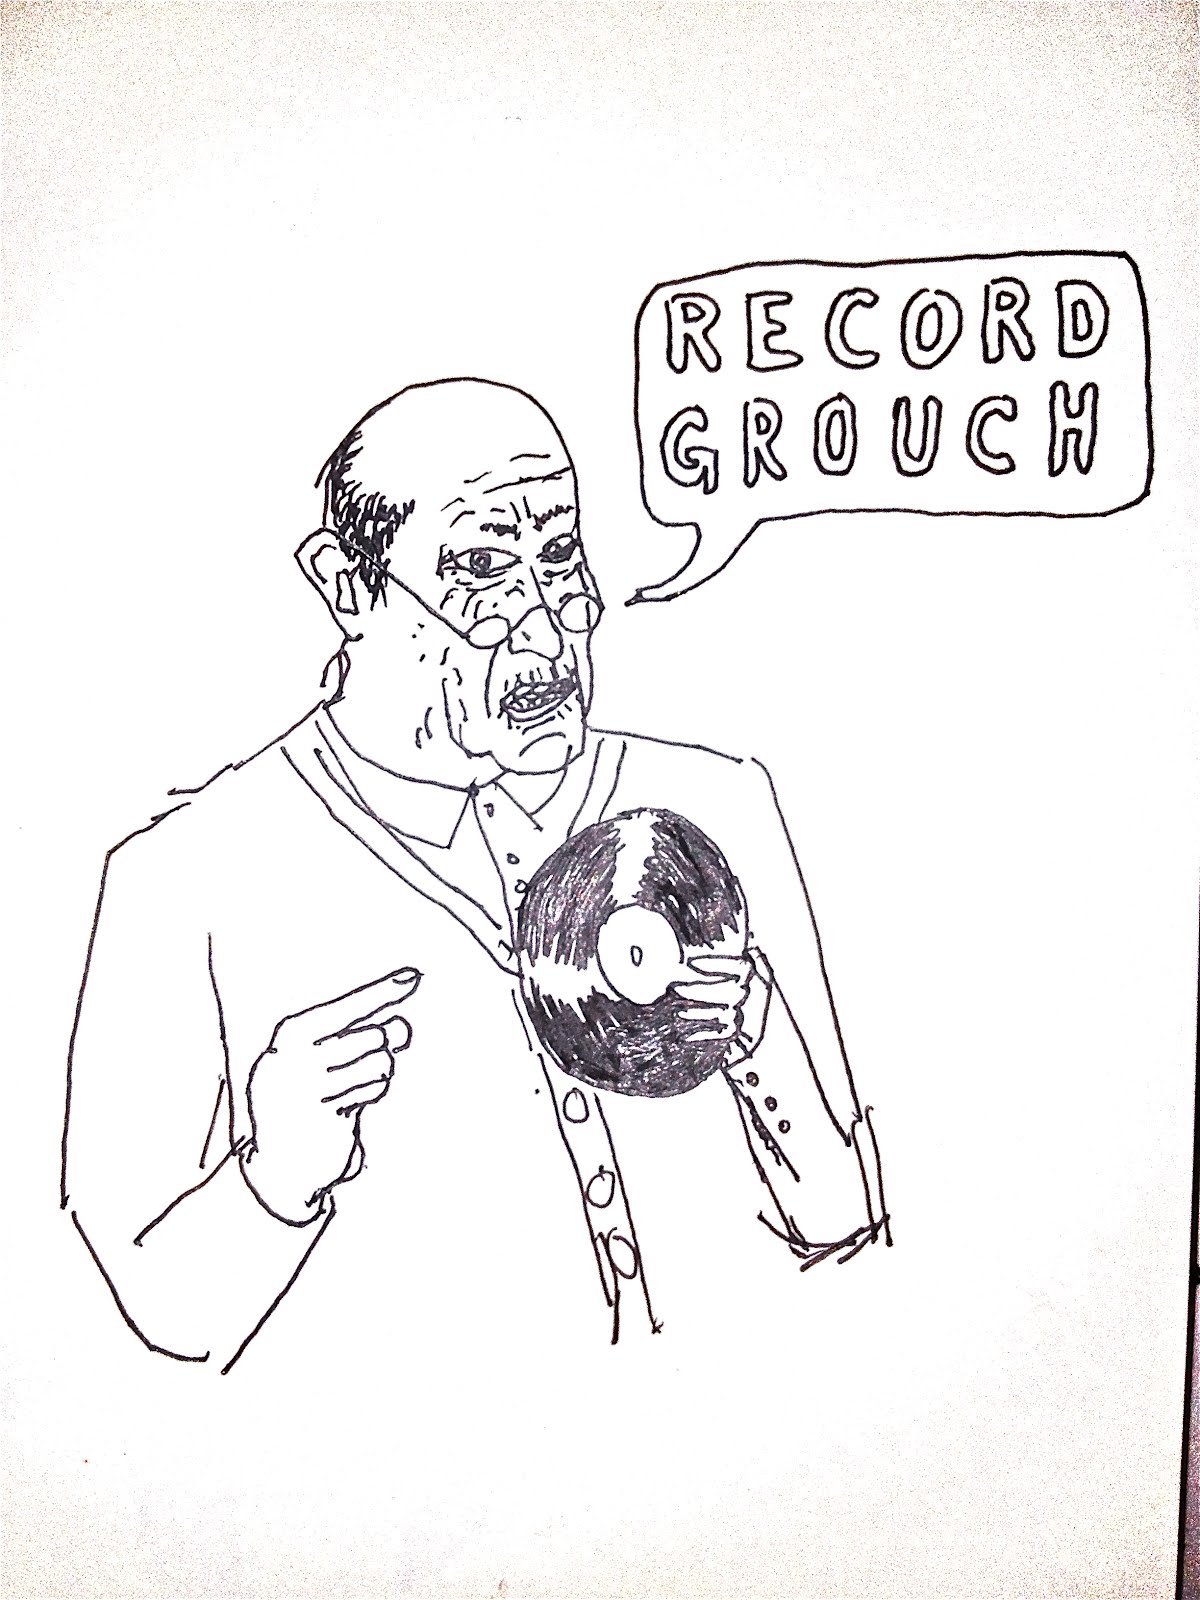 RECORD GROUCH